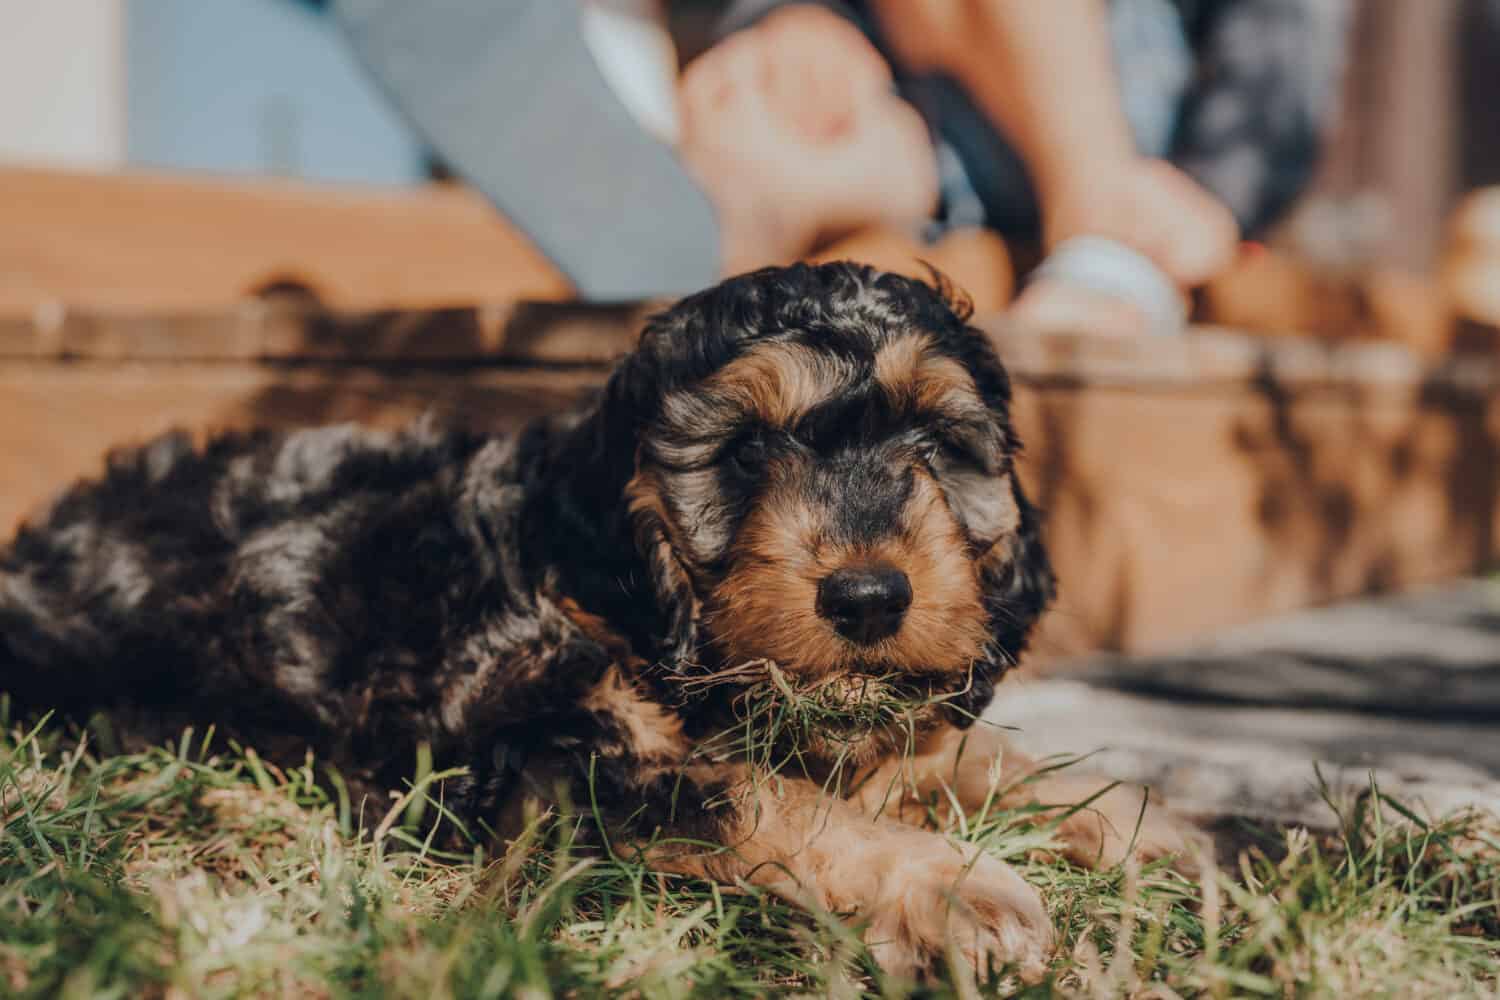 Cute two month old Cockapoo puppy caught eating grass in the garden, looking at the camera, selective focus on the eyes.